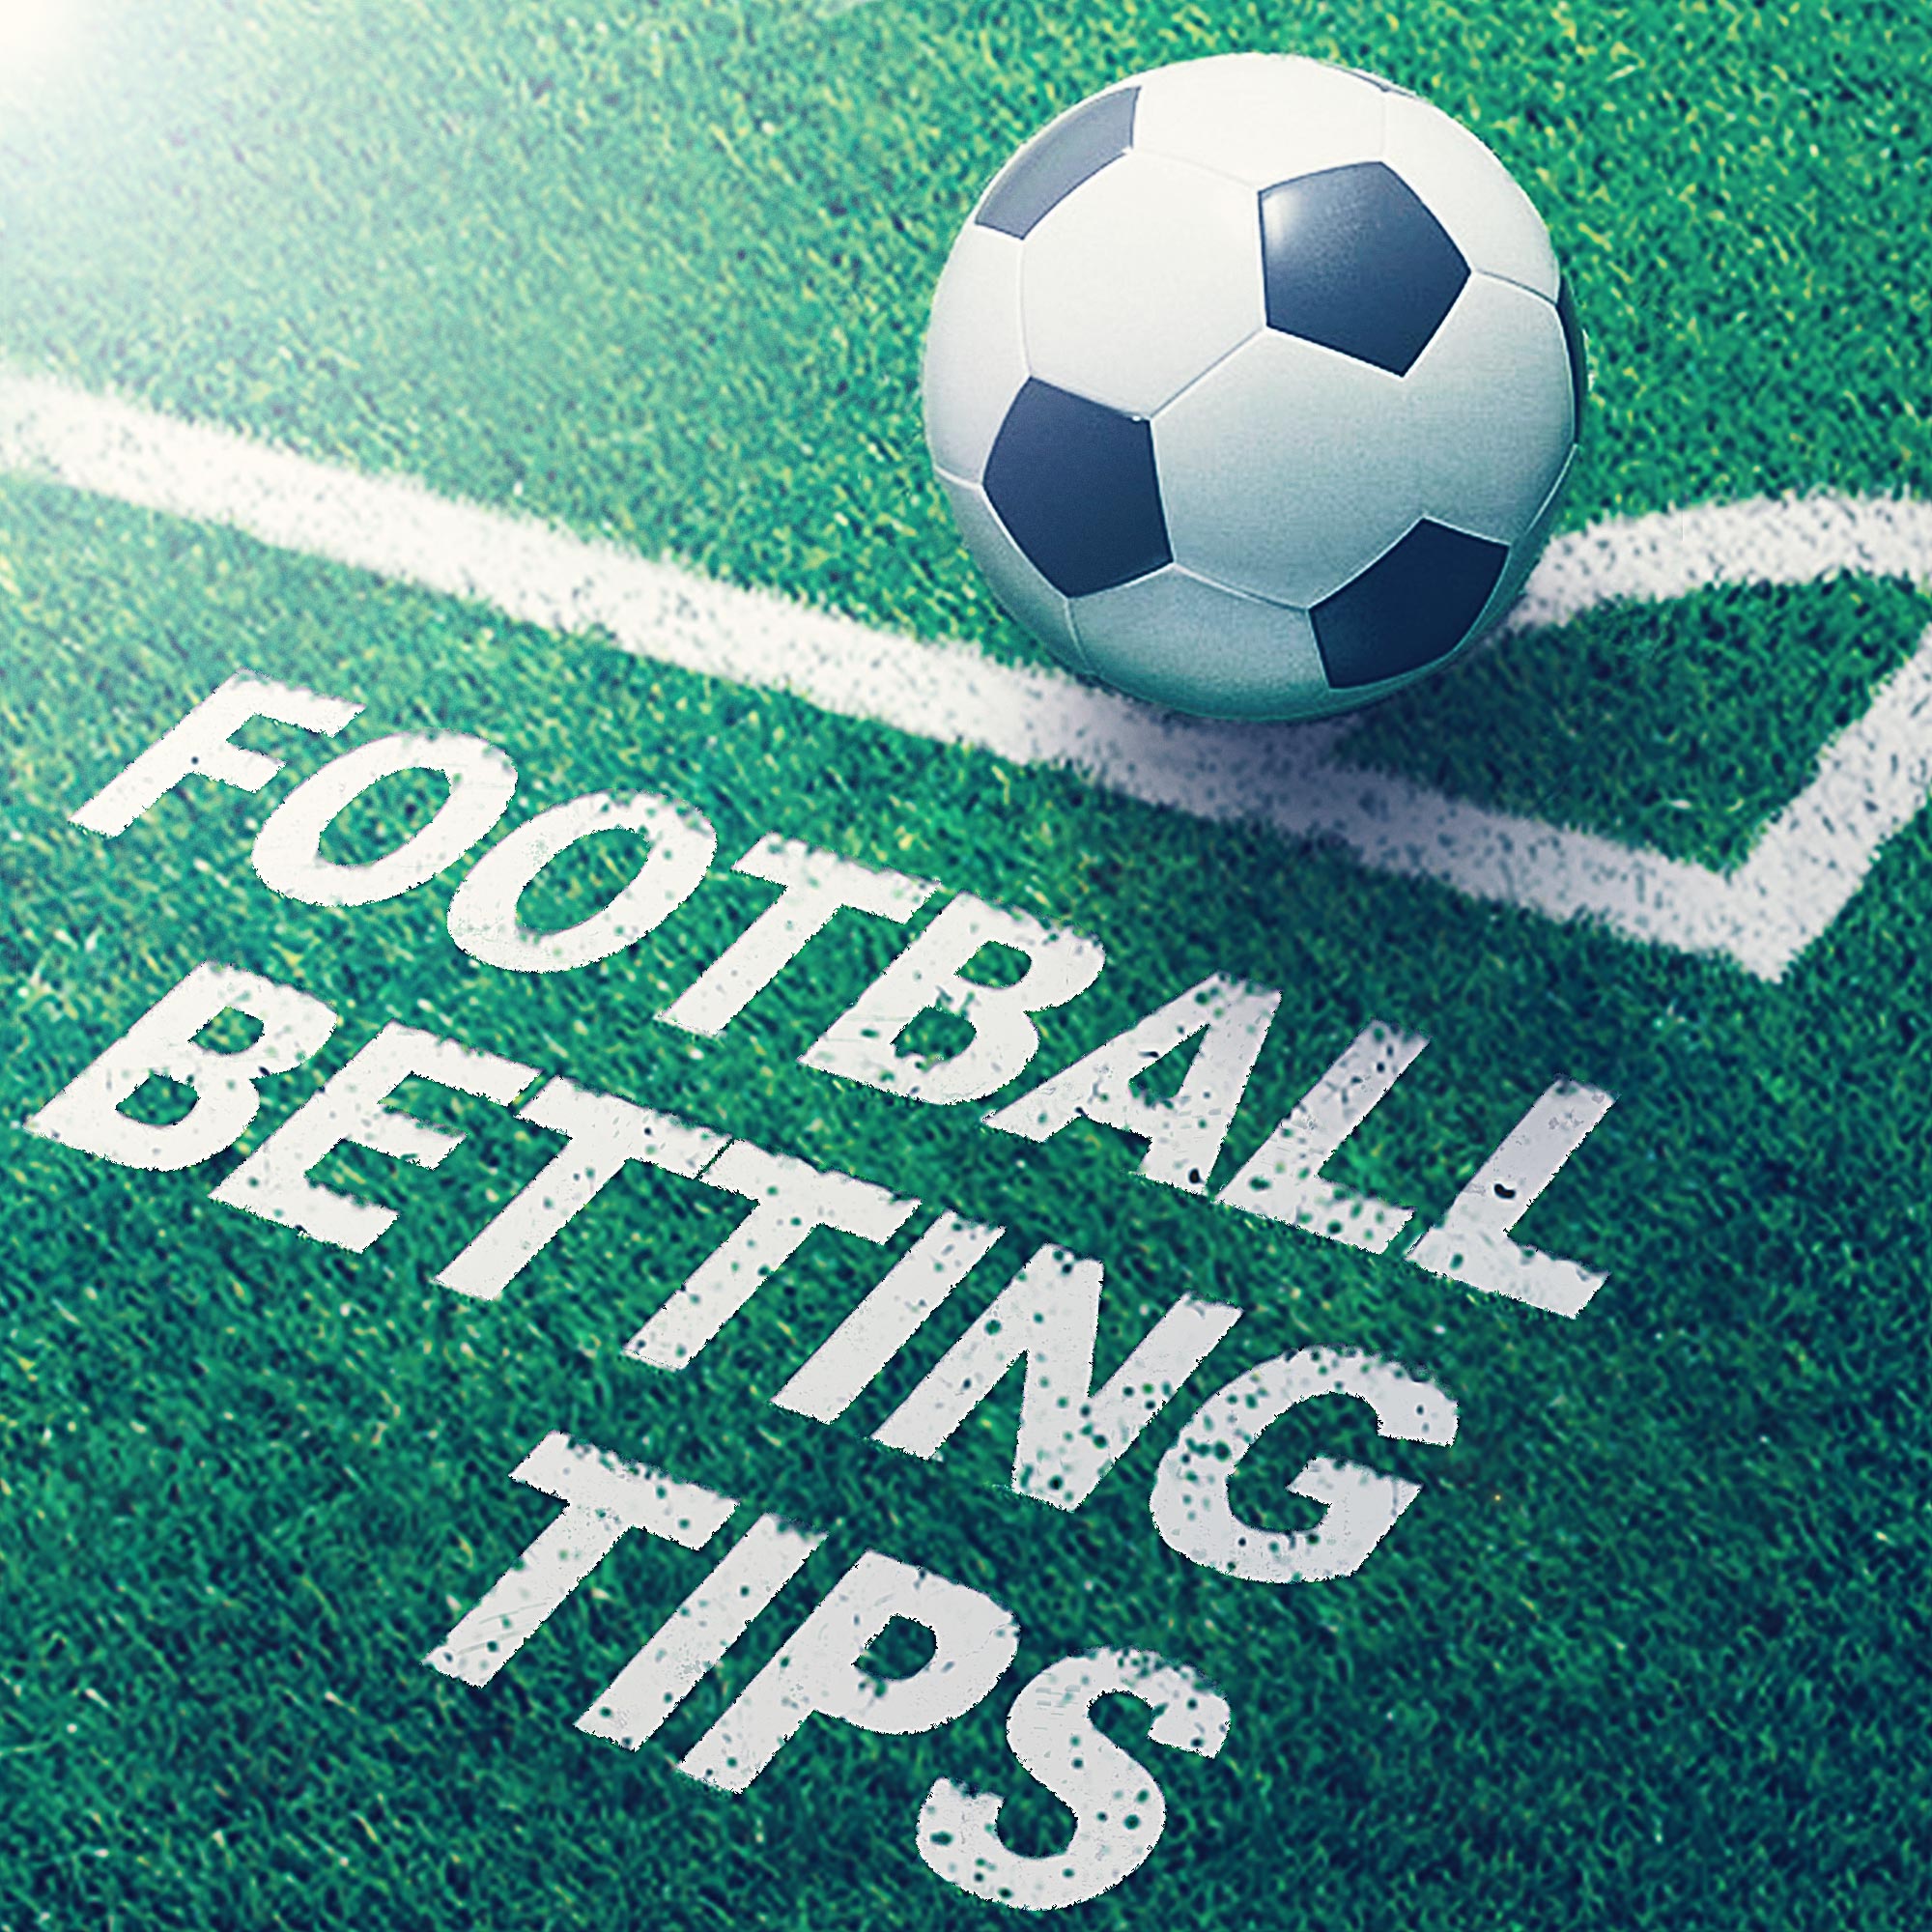 how to online sports betting